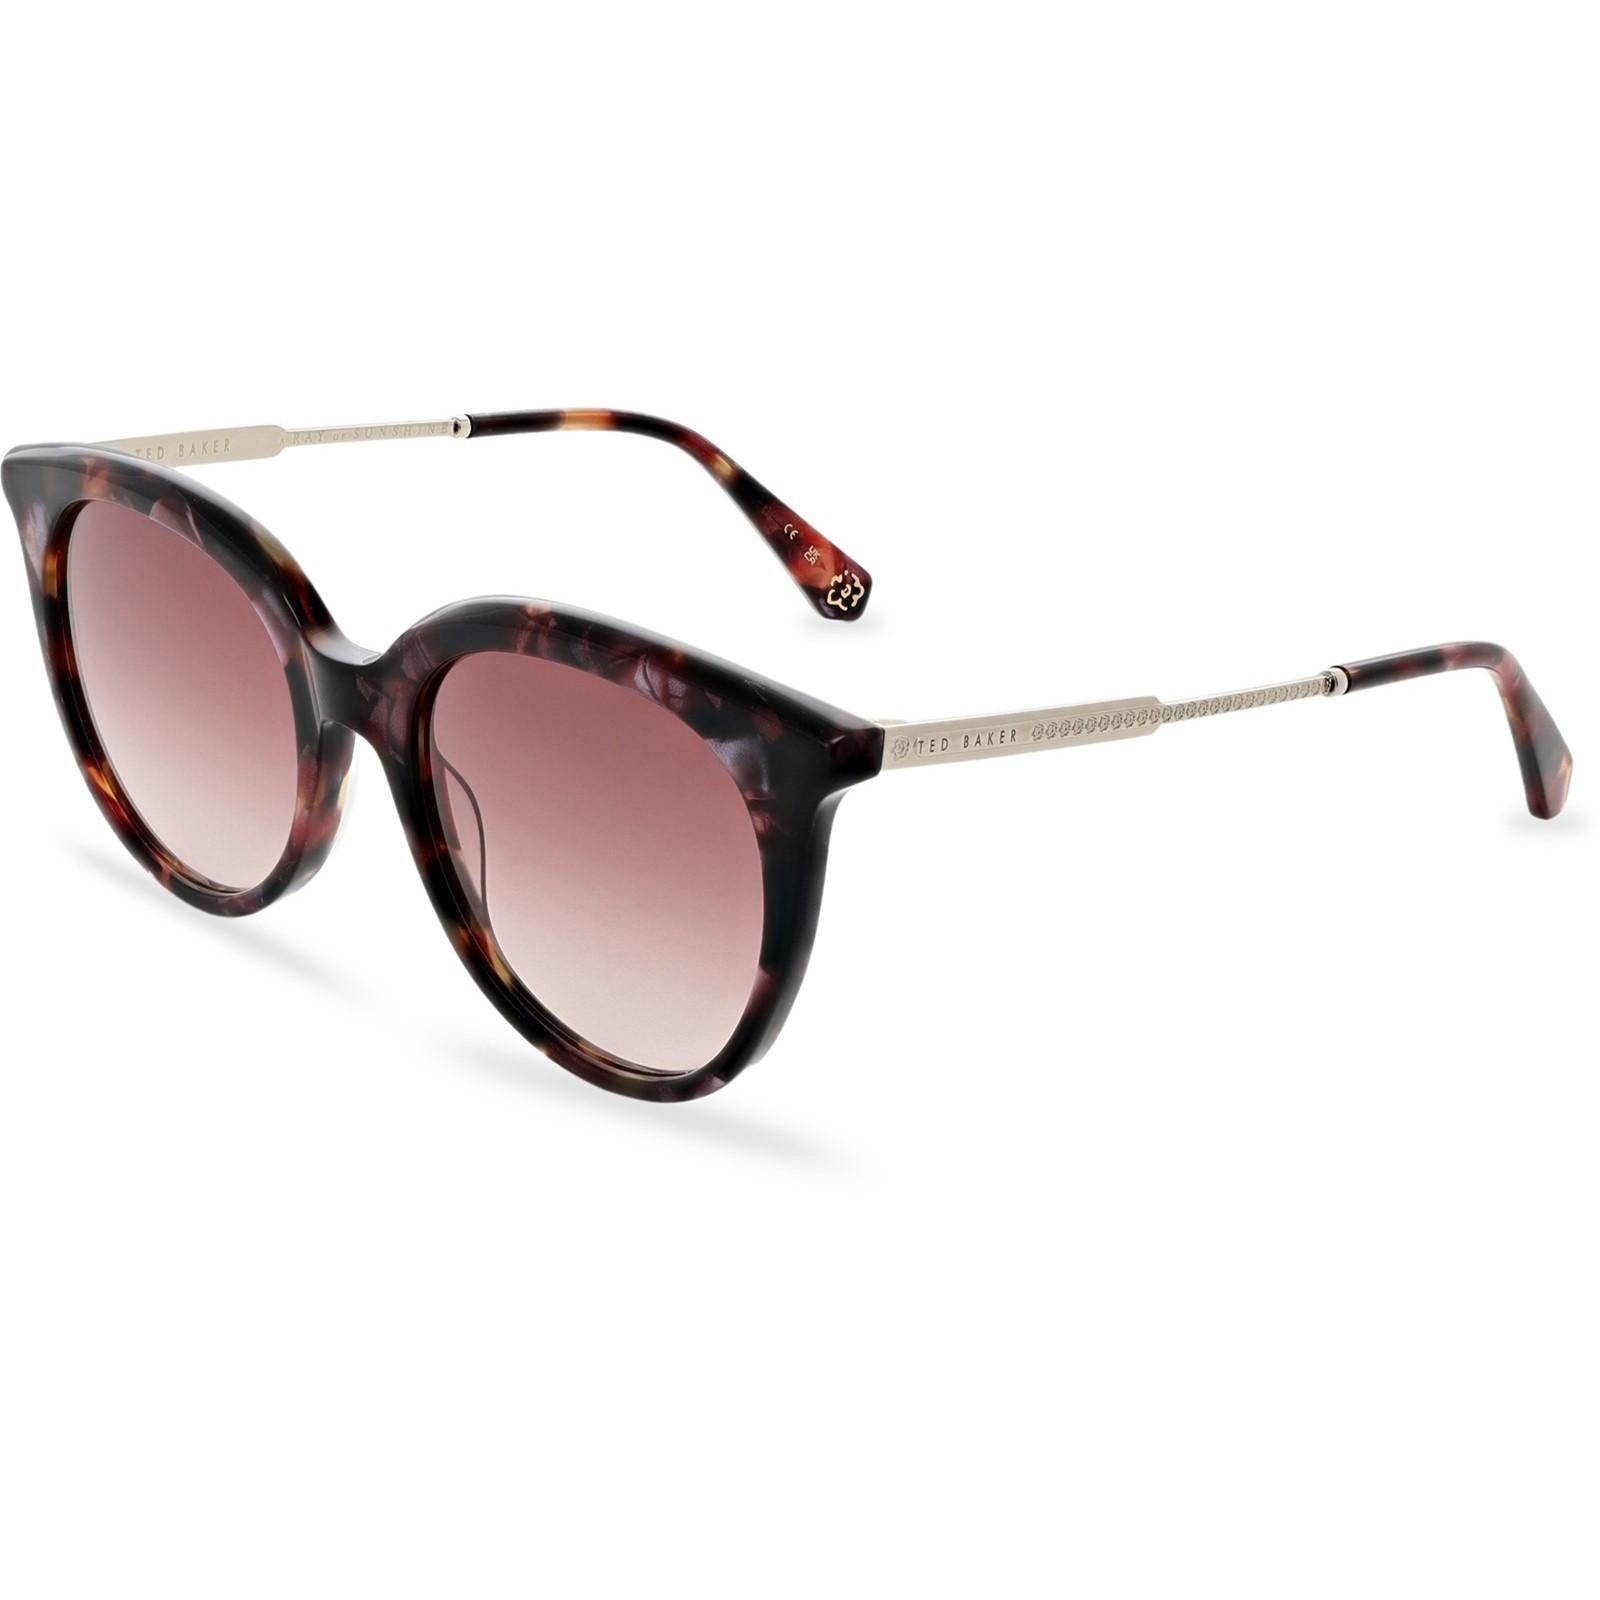 Ted Baker Suzy Sunglasses Shoes